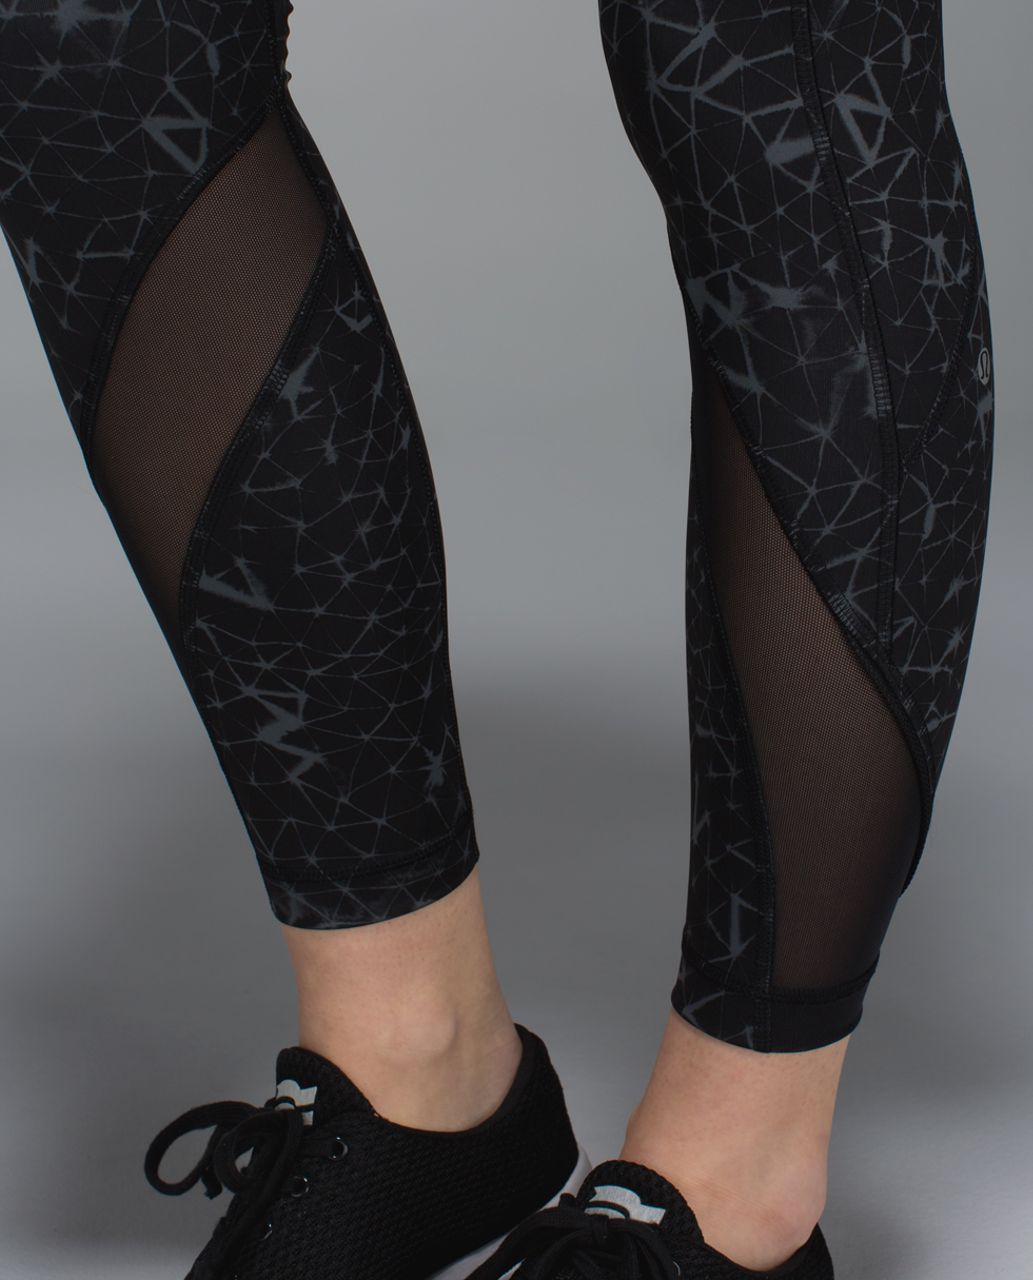 Lululemon Inspire Tight Size 8 - $40 - From Mac